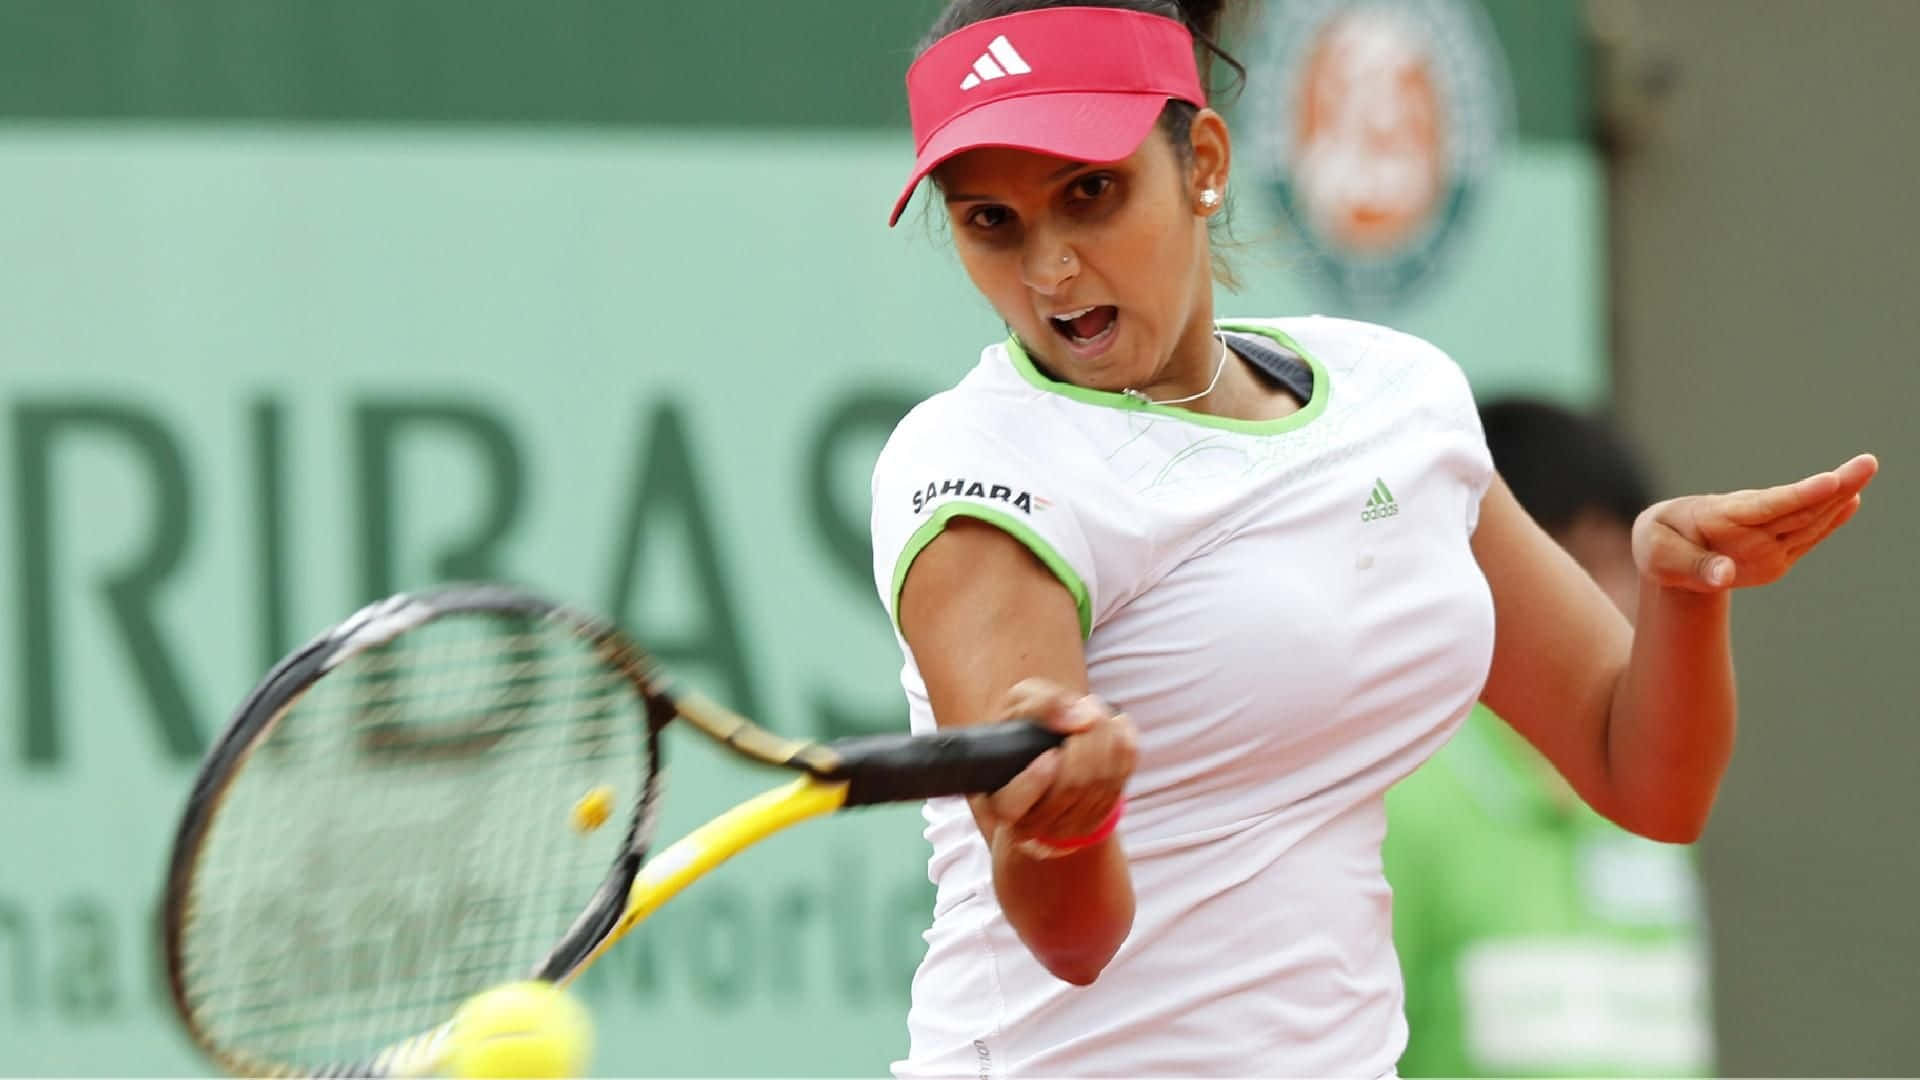 Sania Mirza Xxx Video - Download Hd Indian Tennis Player Sania Mirza Background | Wallpapers.com